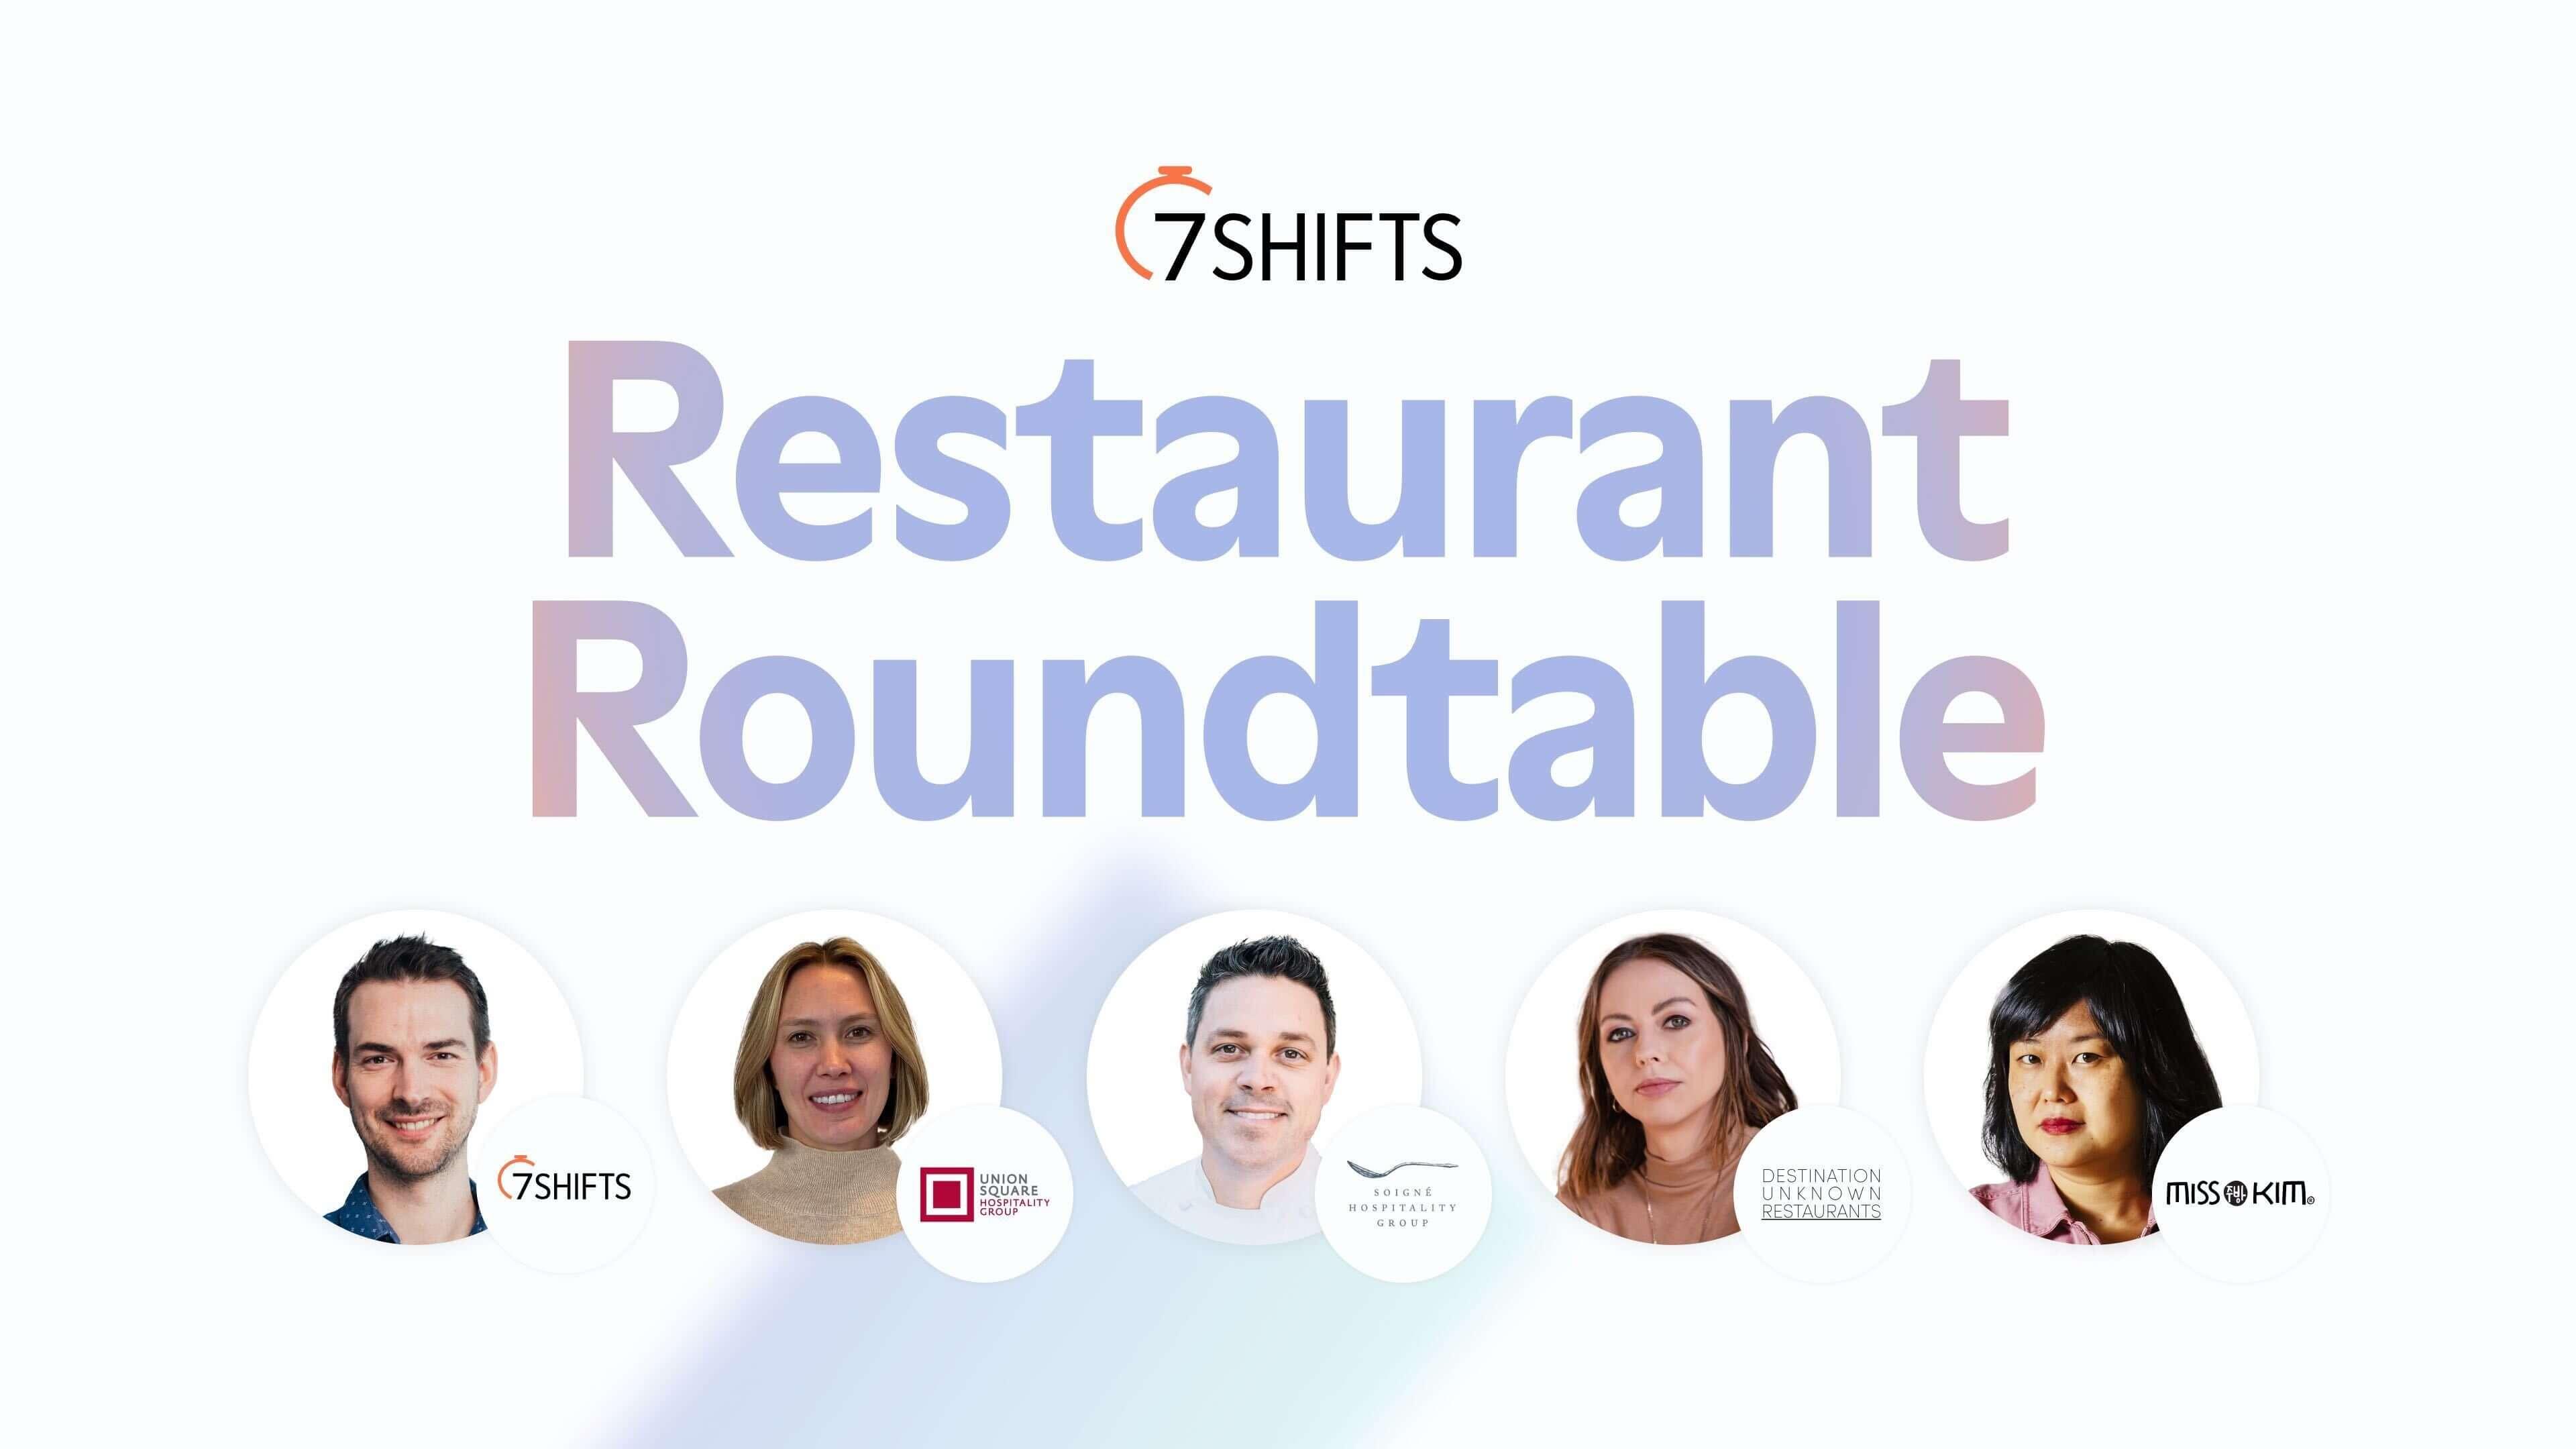 Restaurant Roundtable title with guest speaker images